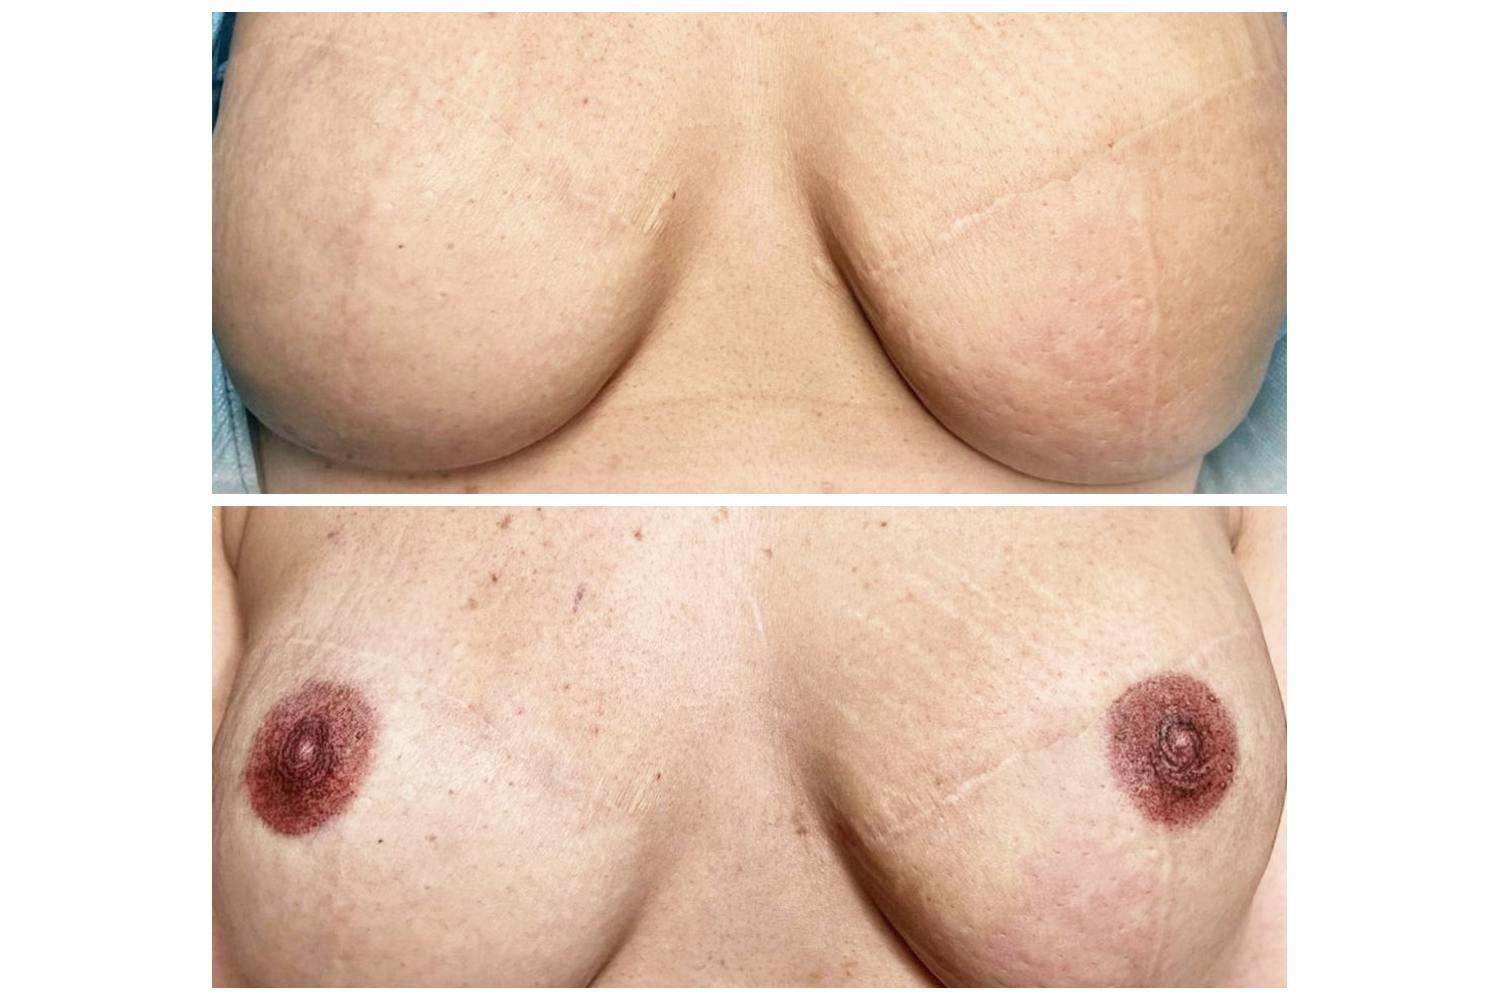 The process of areola repigmentation is akin to a skilled restorer who steps in, with steady hands and a keen eye, understanding the value and significance of this masterpiece.